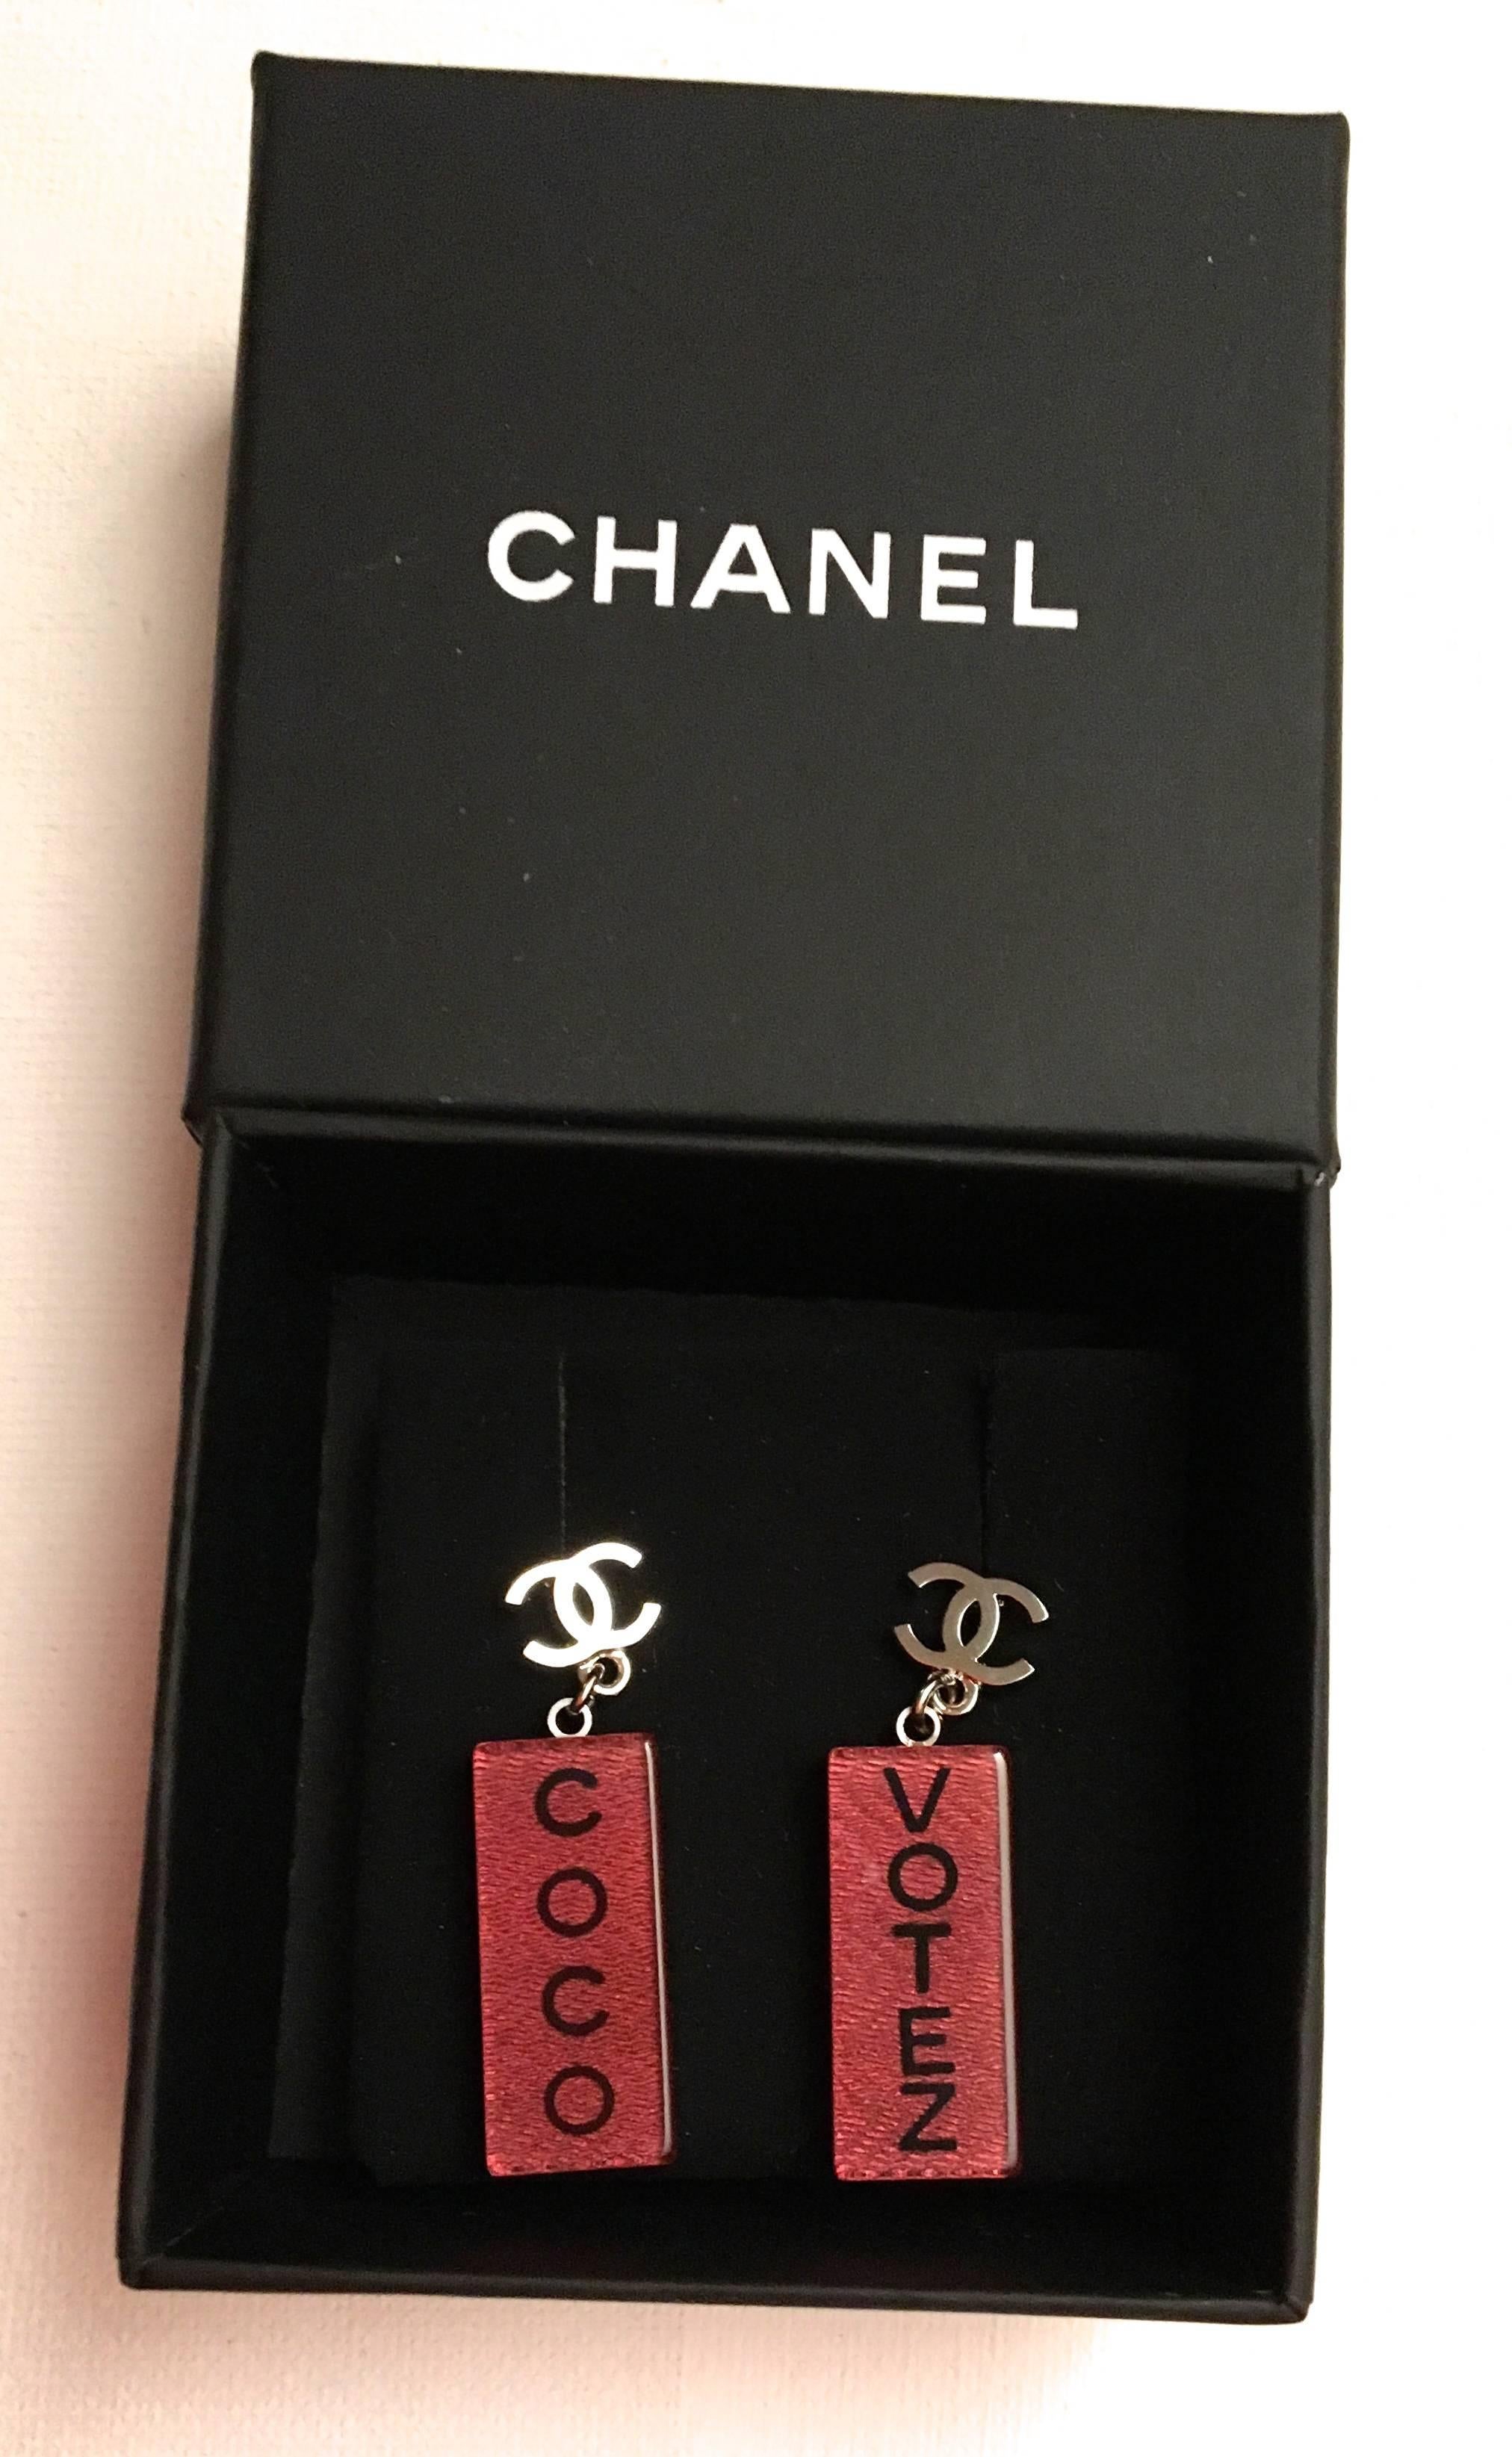 Presented here is a new pair of Chanel lucite earrings. Each earring has a silver tone CC logo with dangling lucite rectangles with a pink / red color tone on either side of the earring. One earring says 'Votez' and the other says 'Coco.' The